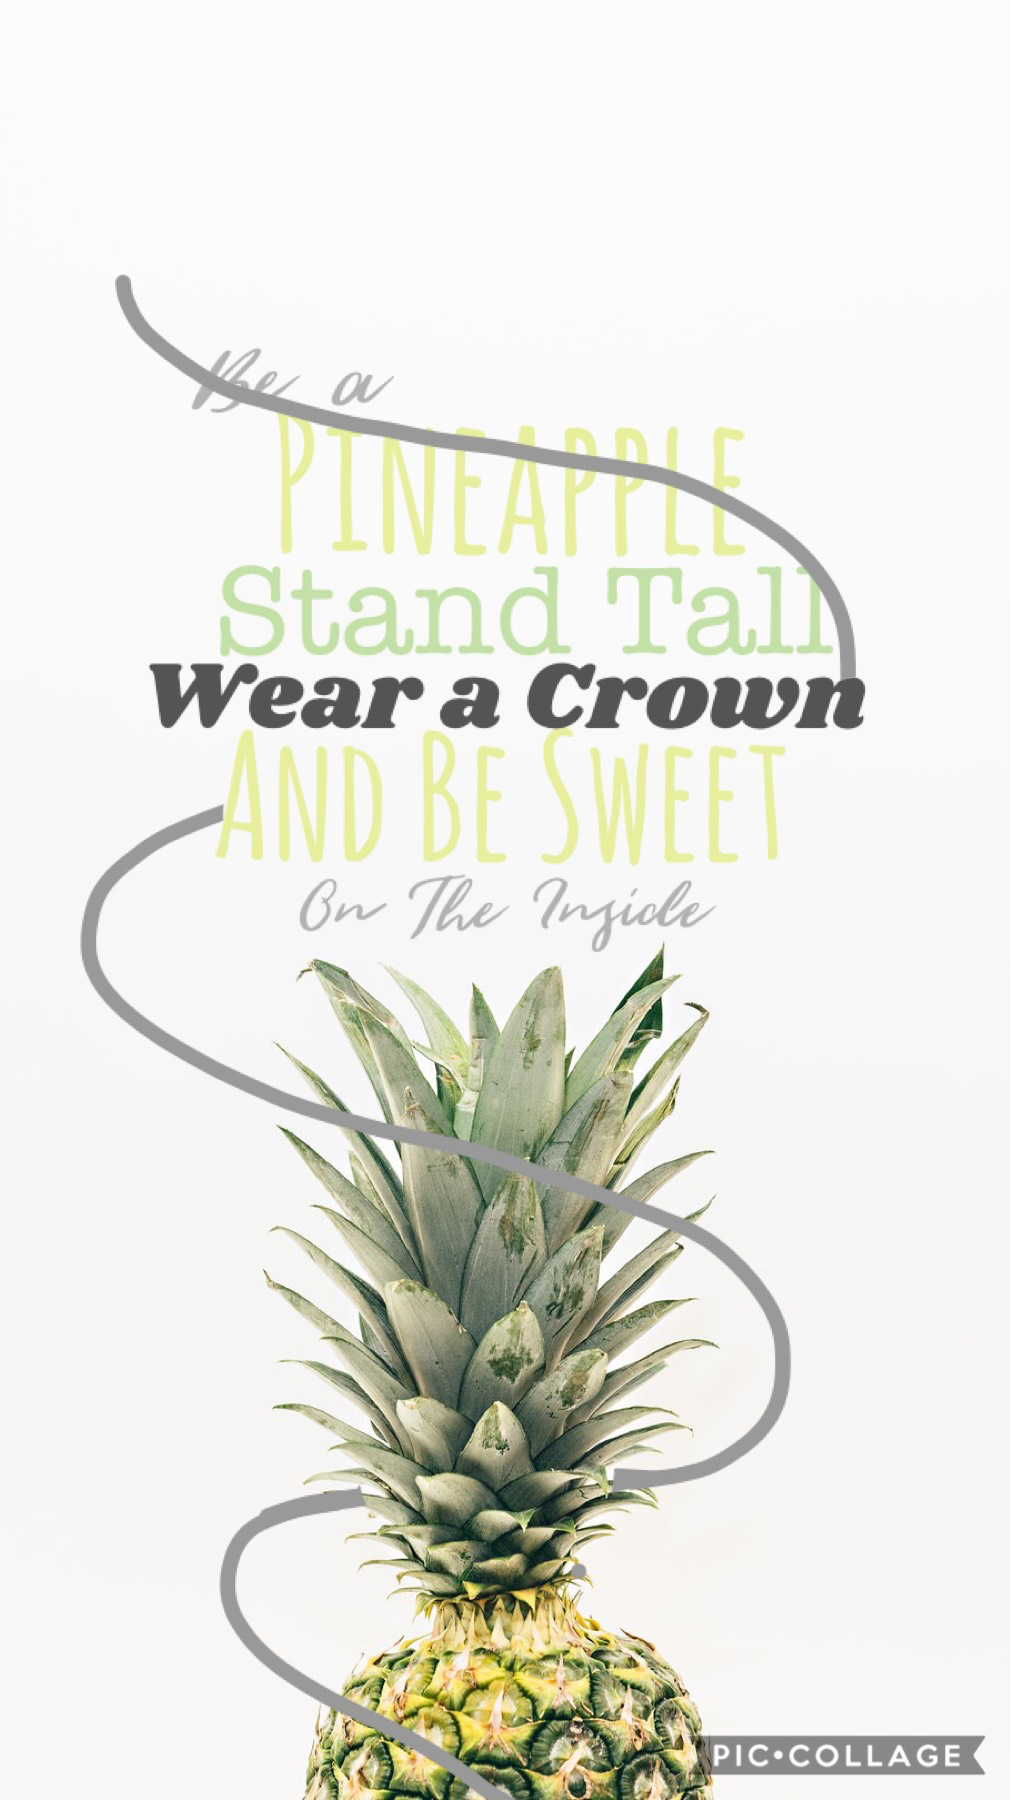 TAP DA PINEAPPLE➡️🍍
WHO LOVES PINEAPPLES?!?!🙋🏻‍♀️
Anywayyyy I’ve been working ALL WEEK and I’m swoooper tired sooo that’s funnn 😋 I have nothing else to say sooooo MY CONTEST ENDS TOMORROW SO DONT FORGET TO ENTER!! 🥳